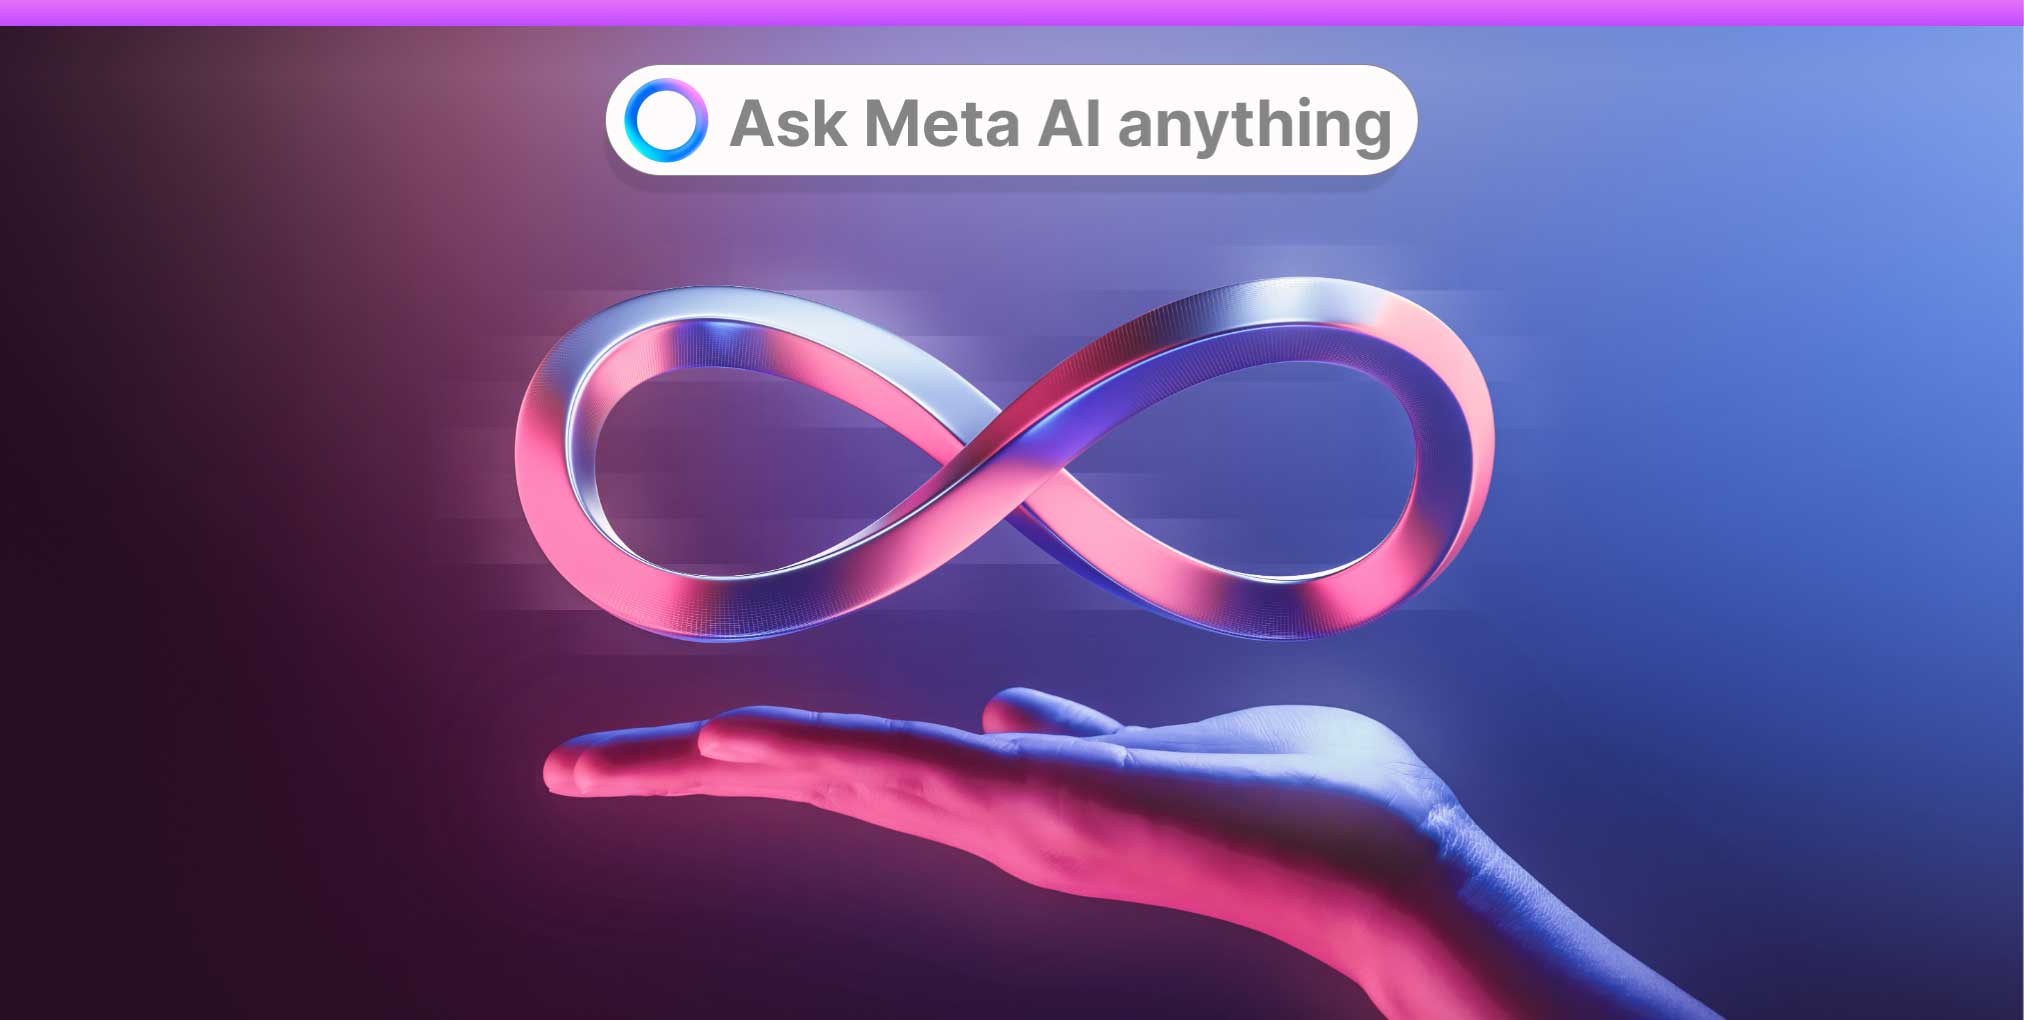 How to Use Meta AI on WhatsApp, Facebook, Instagram and Messenger